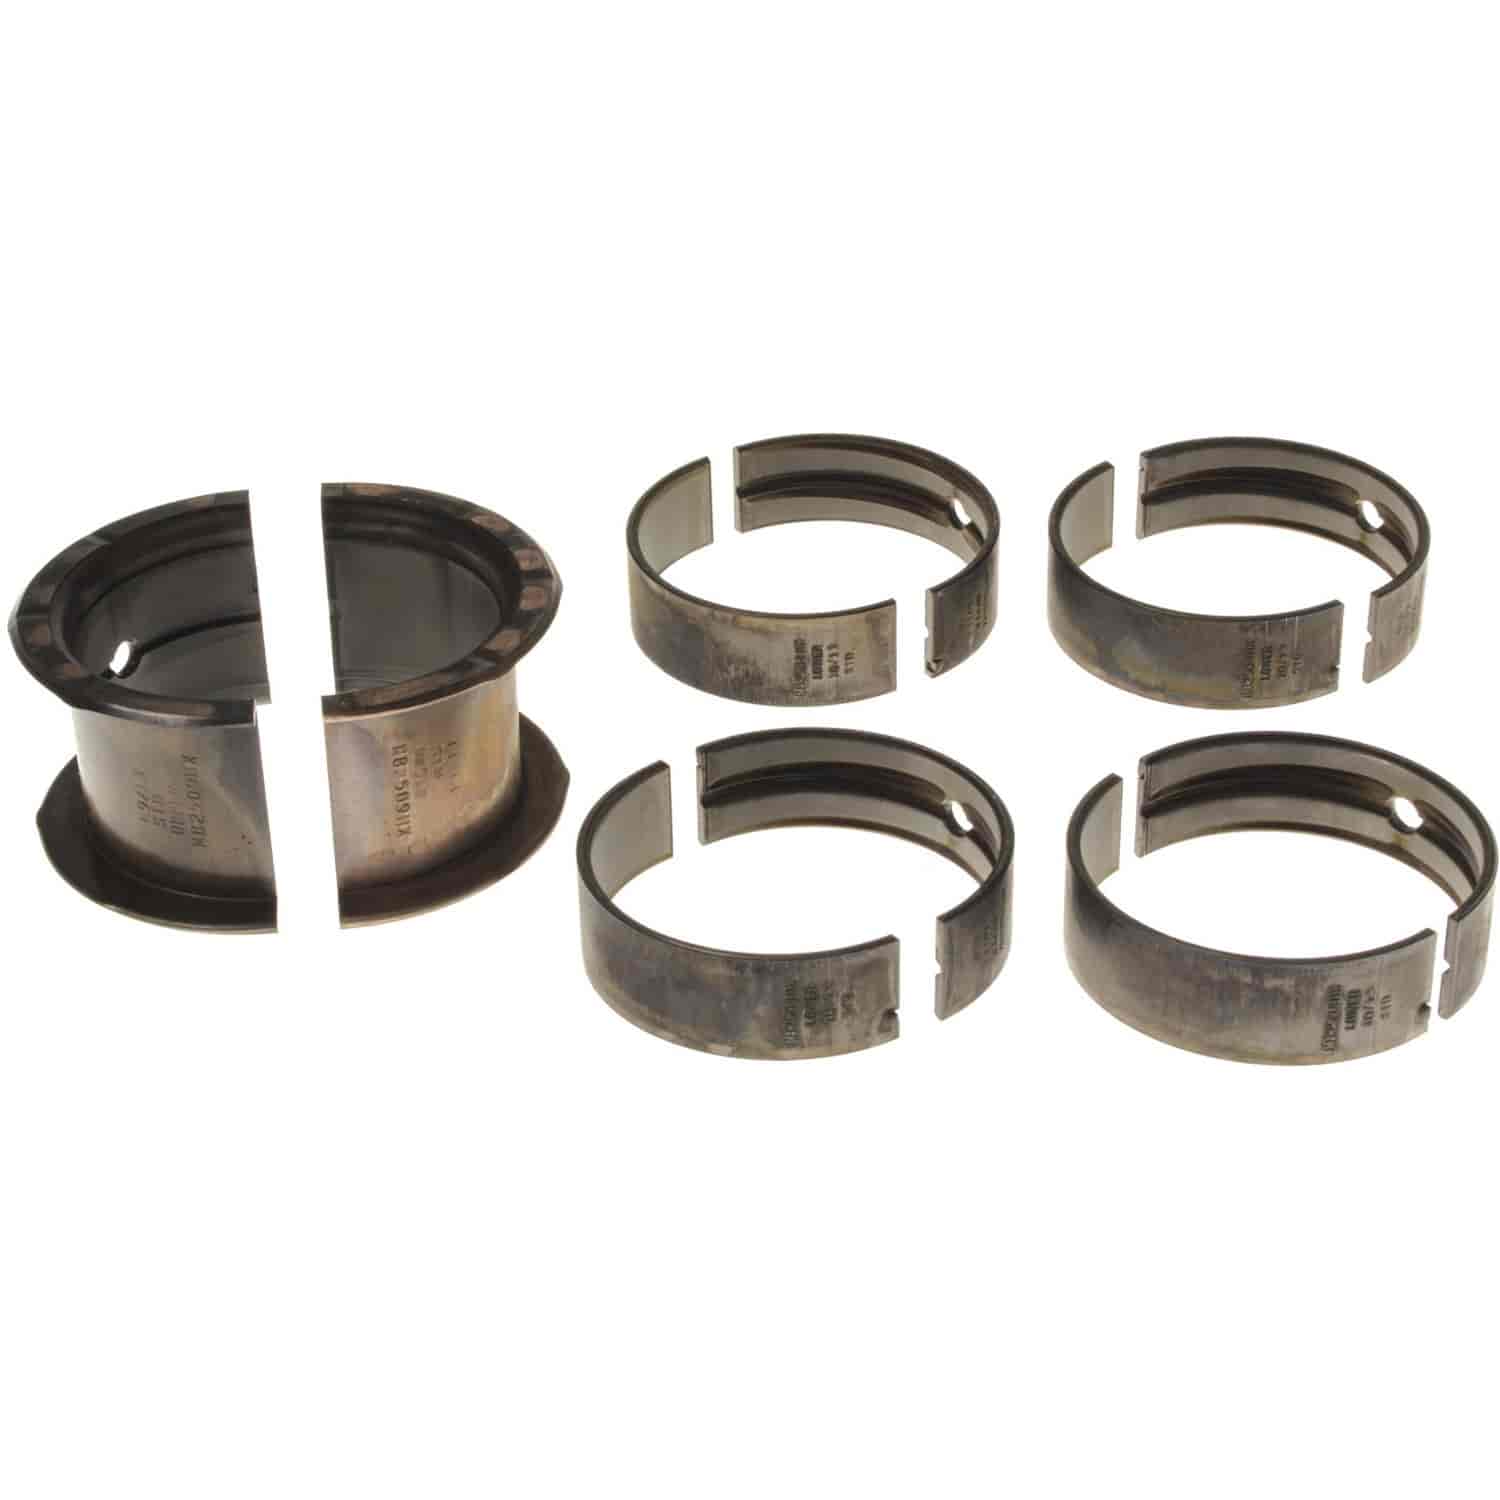 Main Bearing Set Chevy 1968-2002 V8 262/267/302/305/307/327/350 with Standard Size